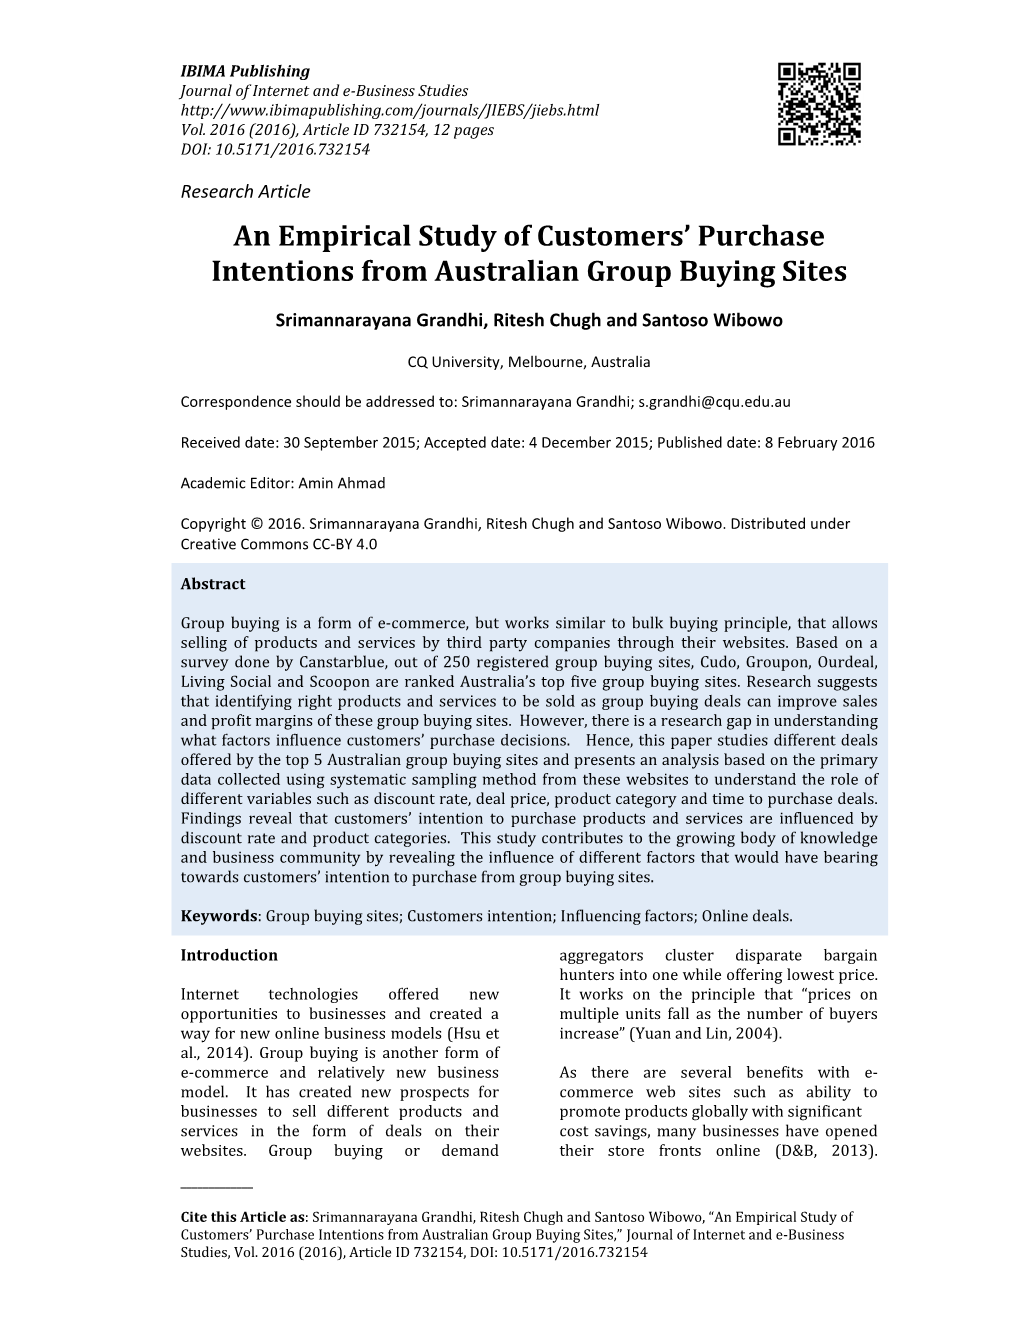 An Empirical Study of Customers' Purchase Intentions from Australian Group Buying Sites